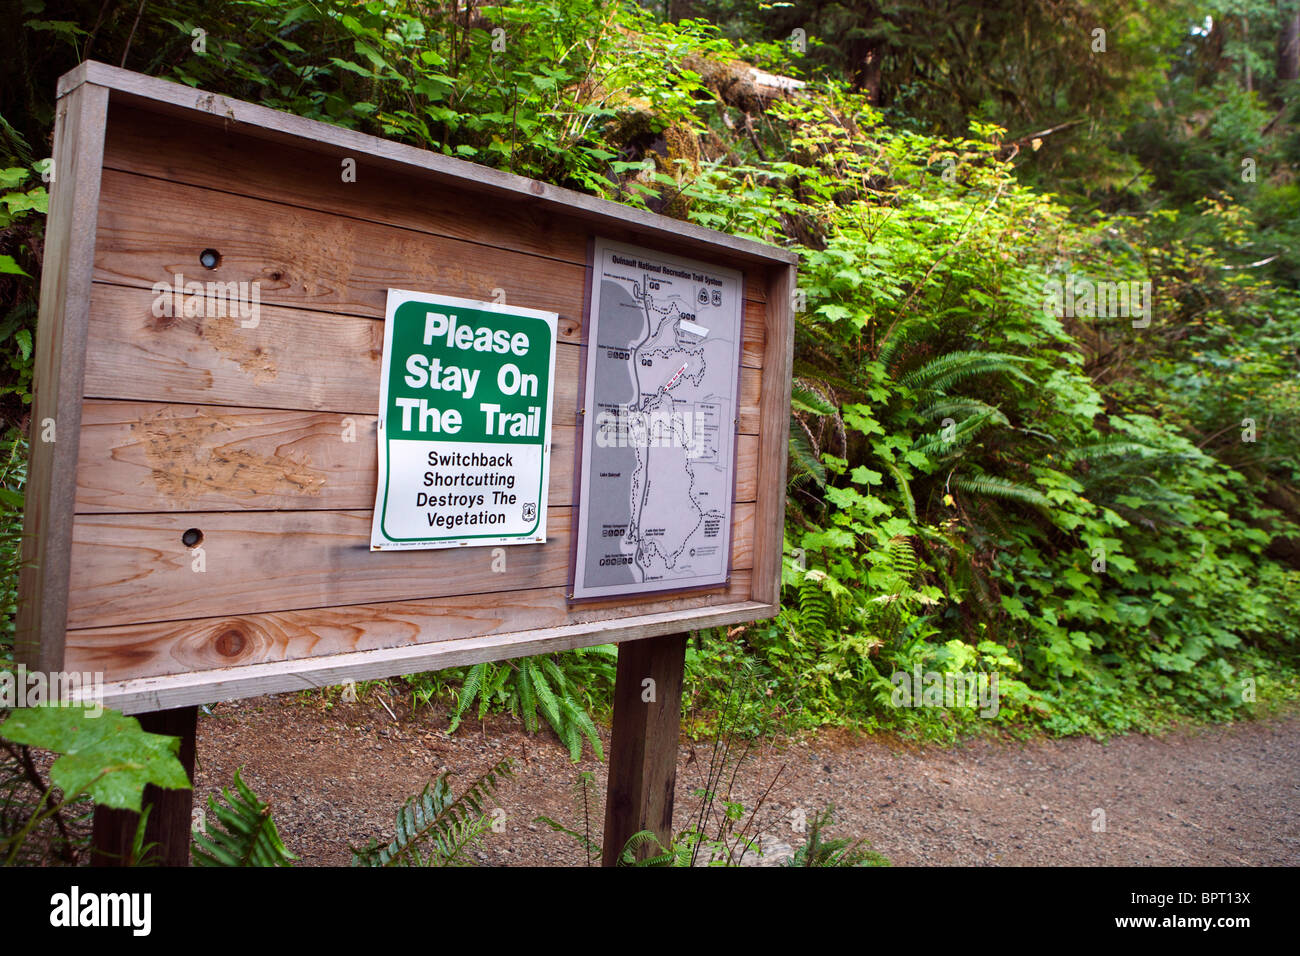 US Forest Service bulletin board with trail maps and warning to stay on trail, Lake Quinault Rain Forest Stock Photo